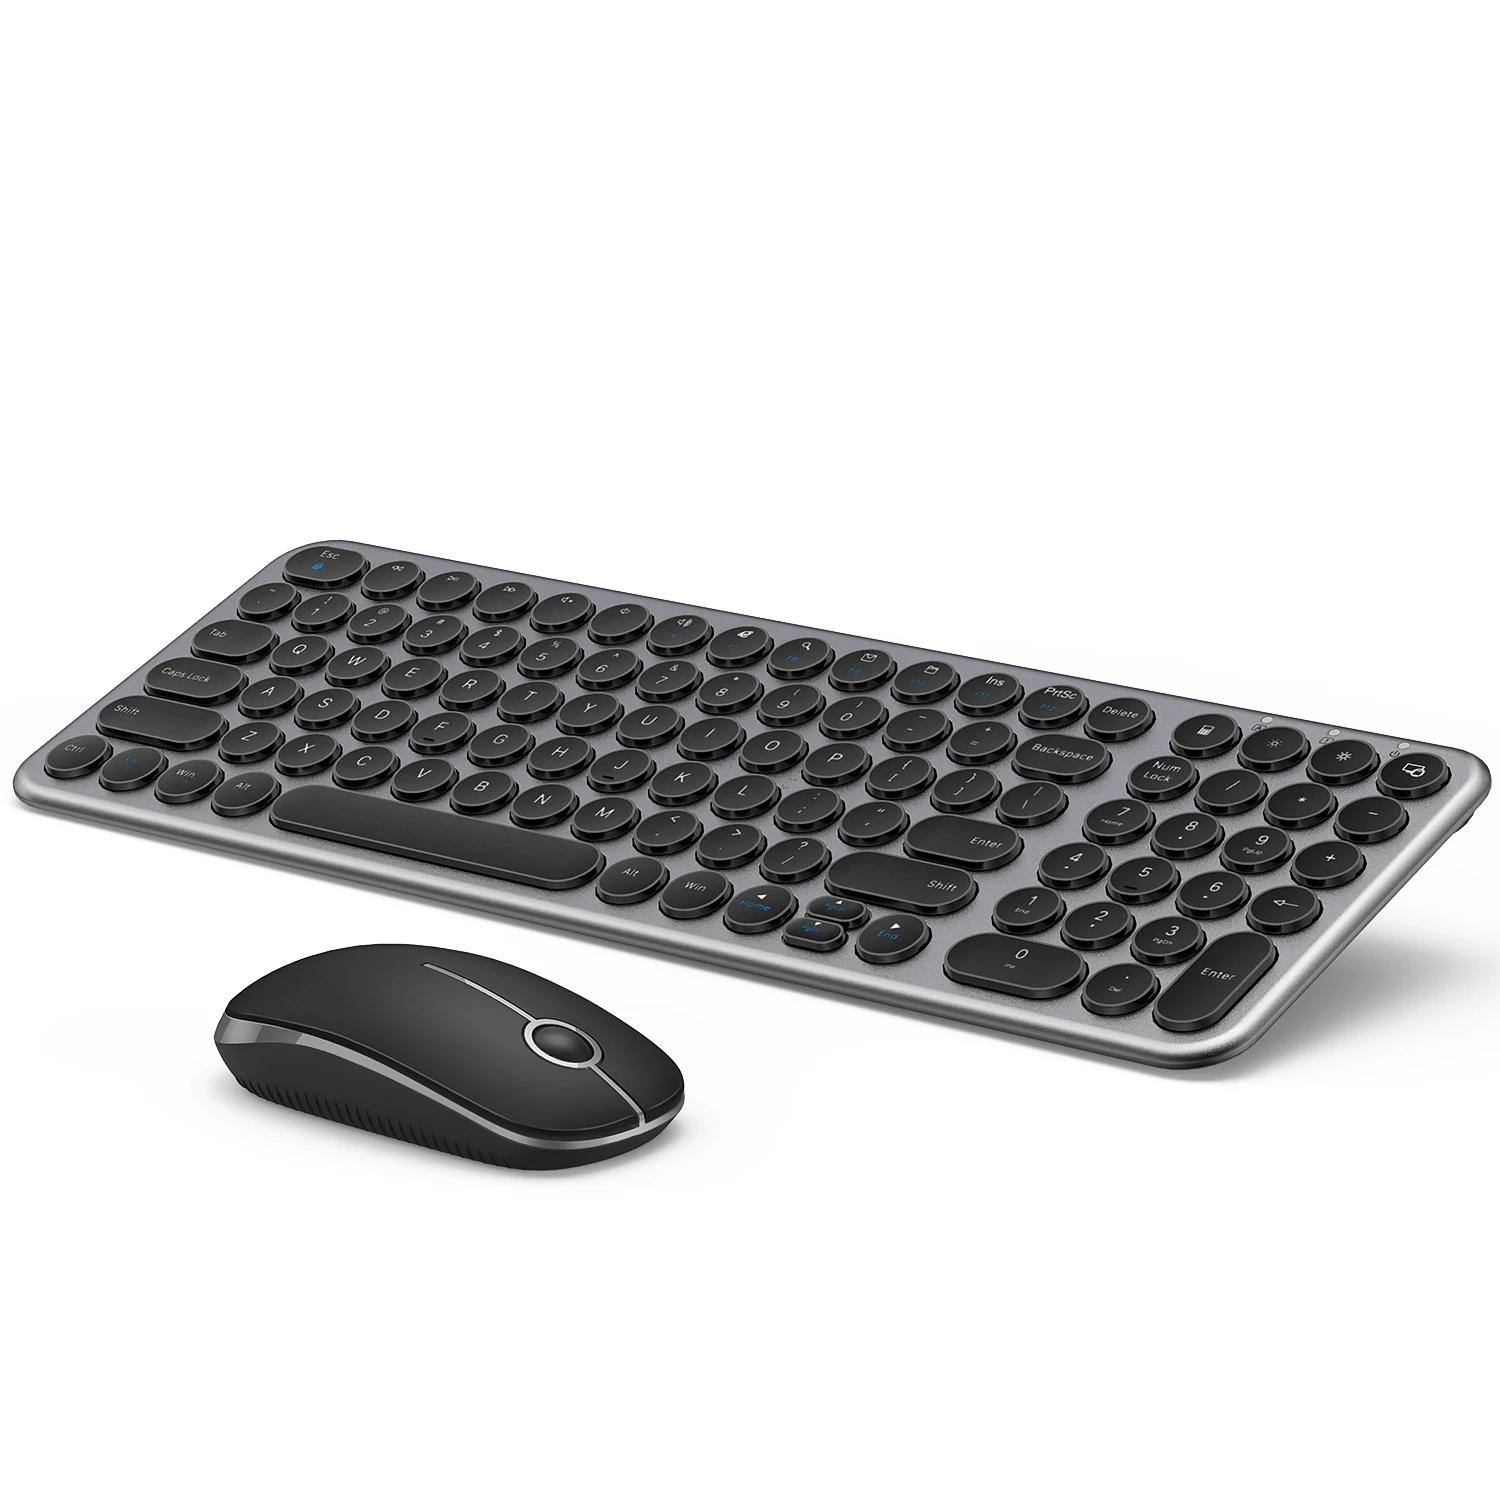 

Jelly Comb Wireless Keyboard and Mouse Combo 2.4G Slim Ergonomic Quiet Keyboard and Mouse with Round Keys for Windows Laptop PC